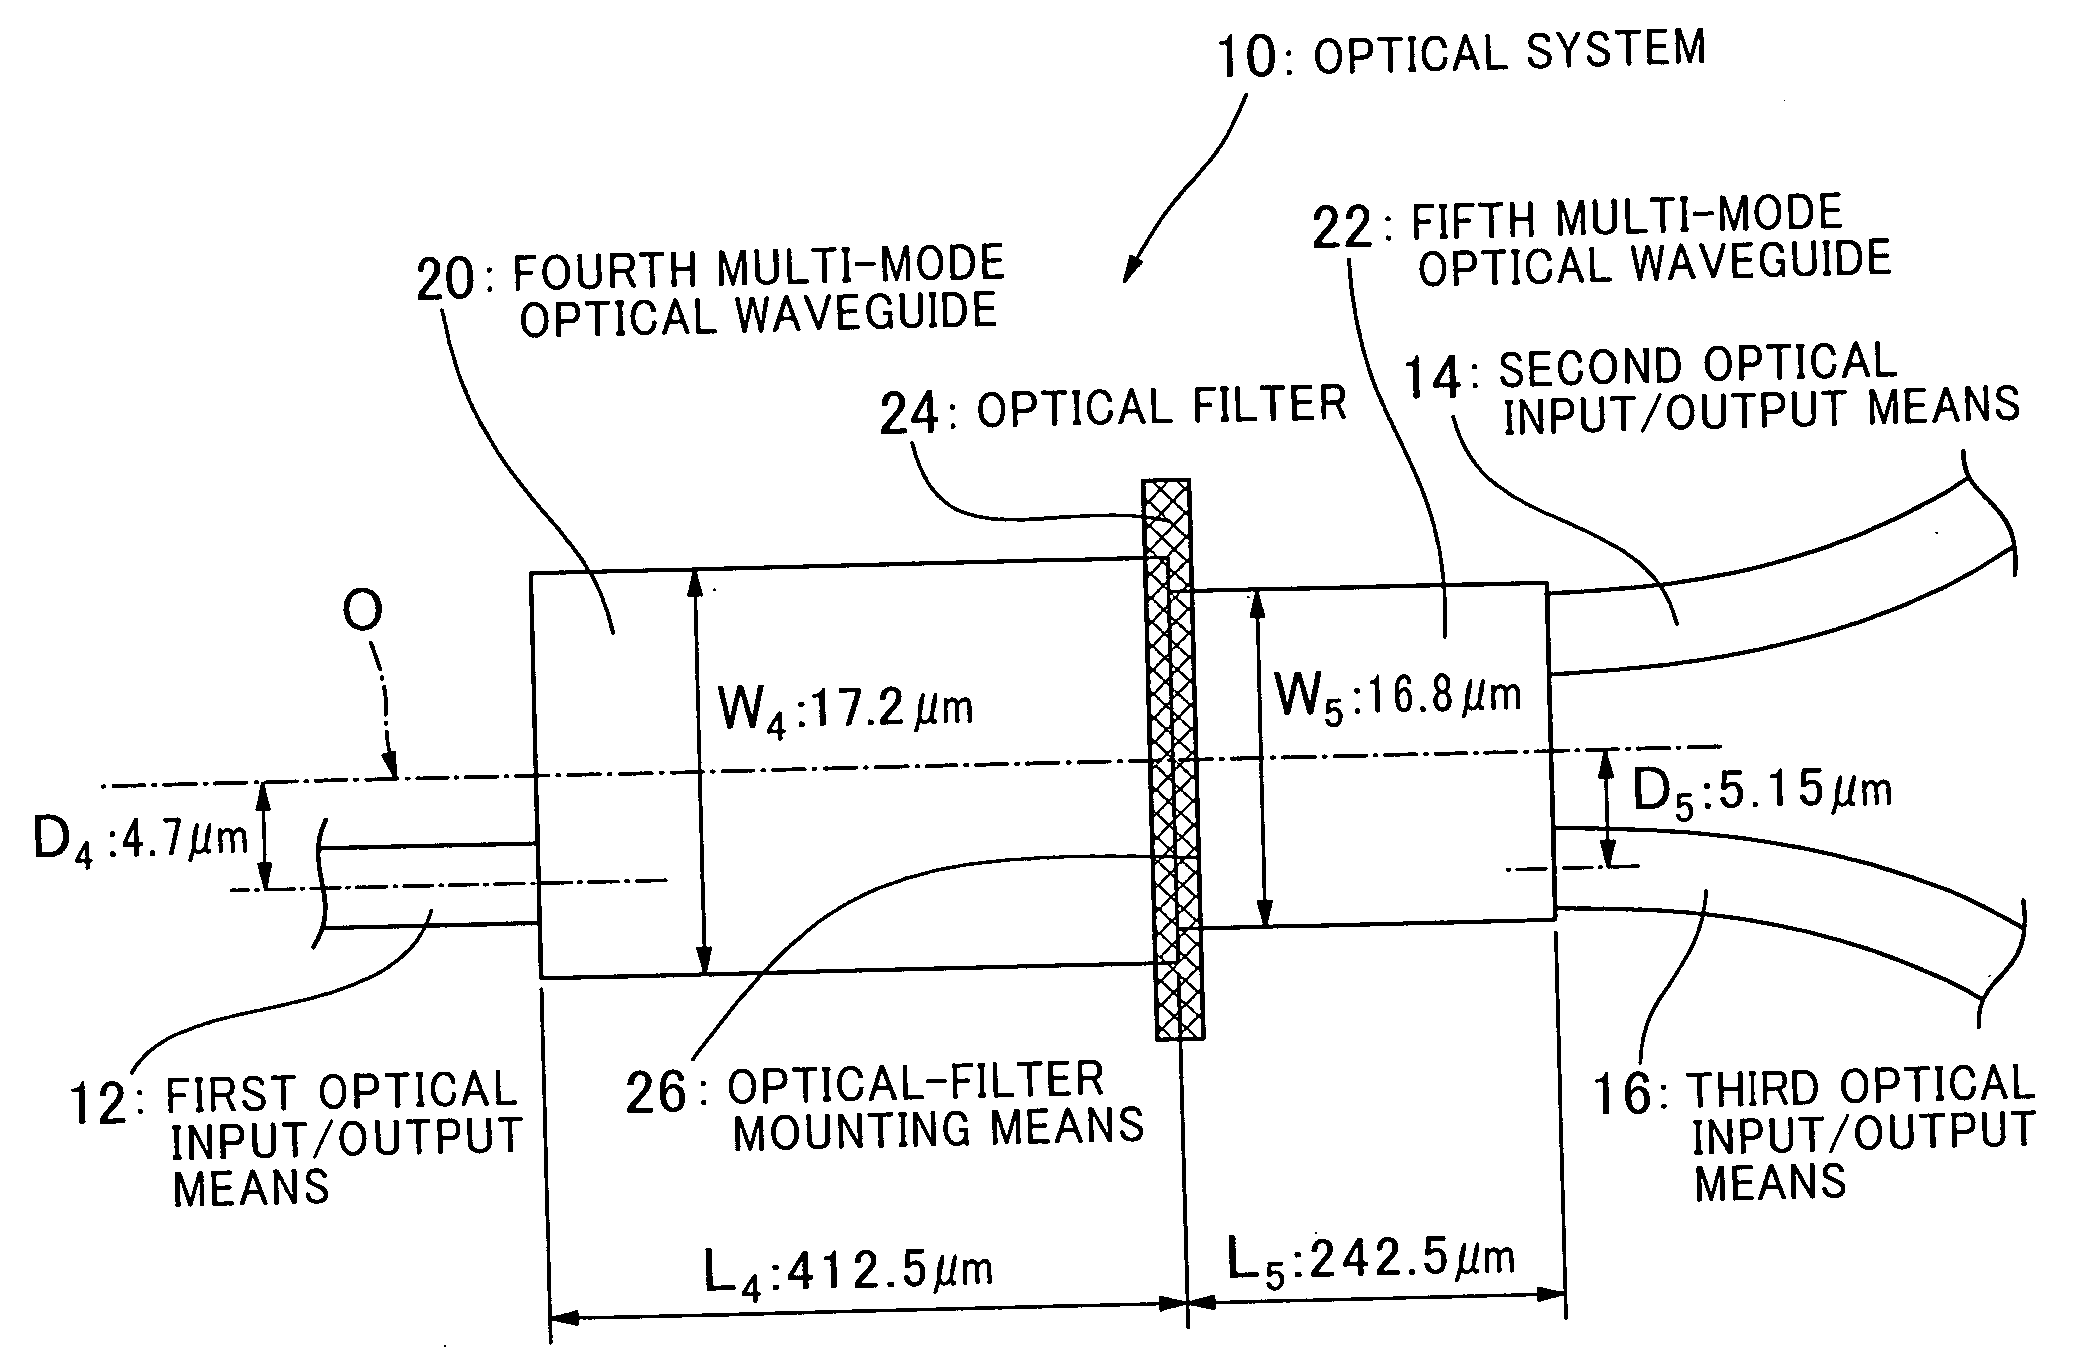 Optical system with optical waveguides